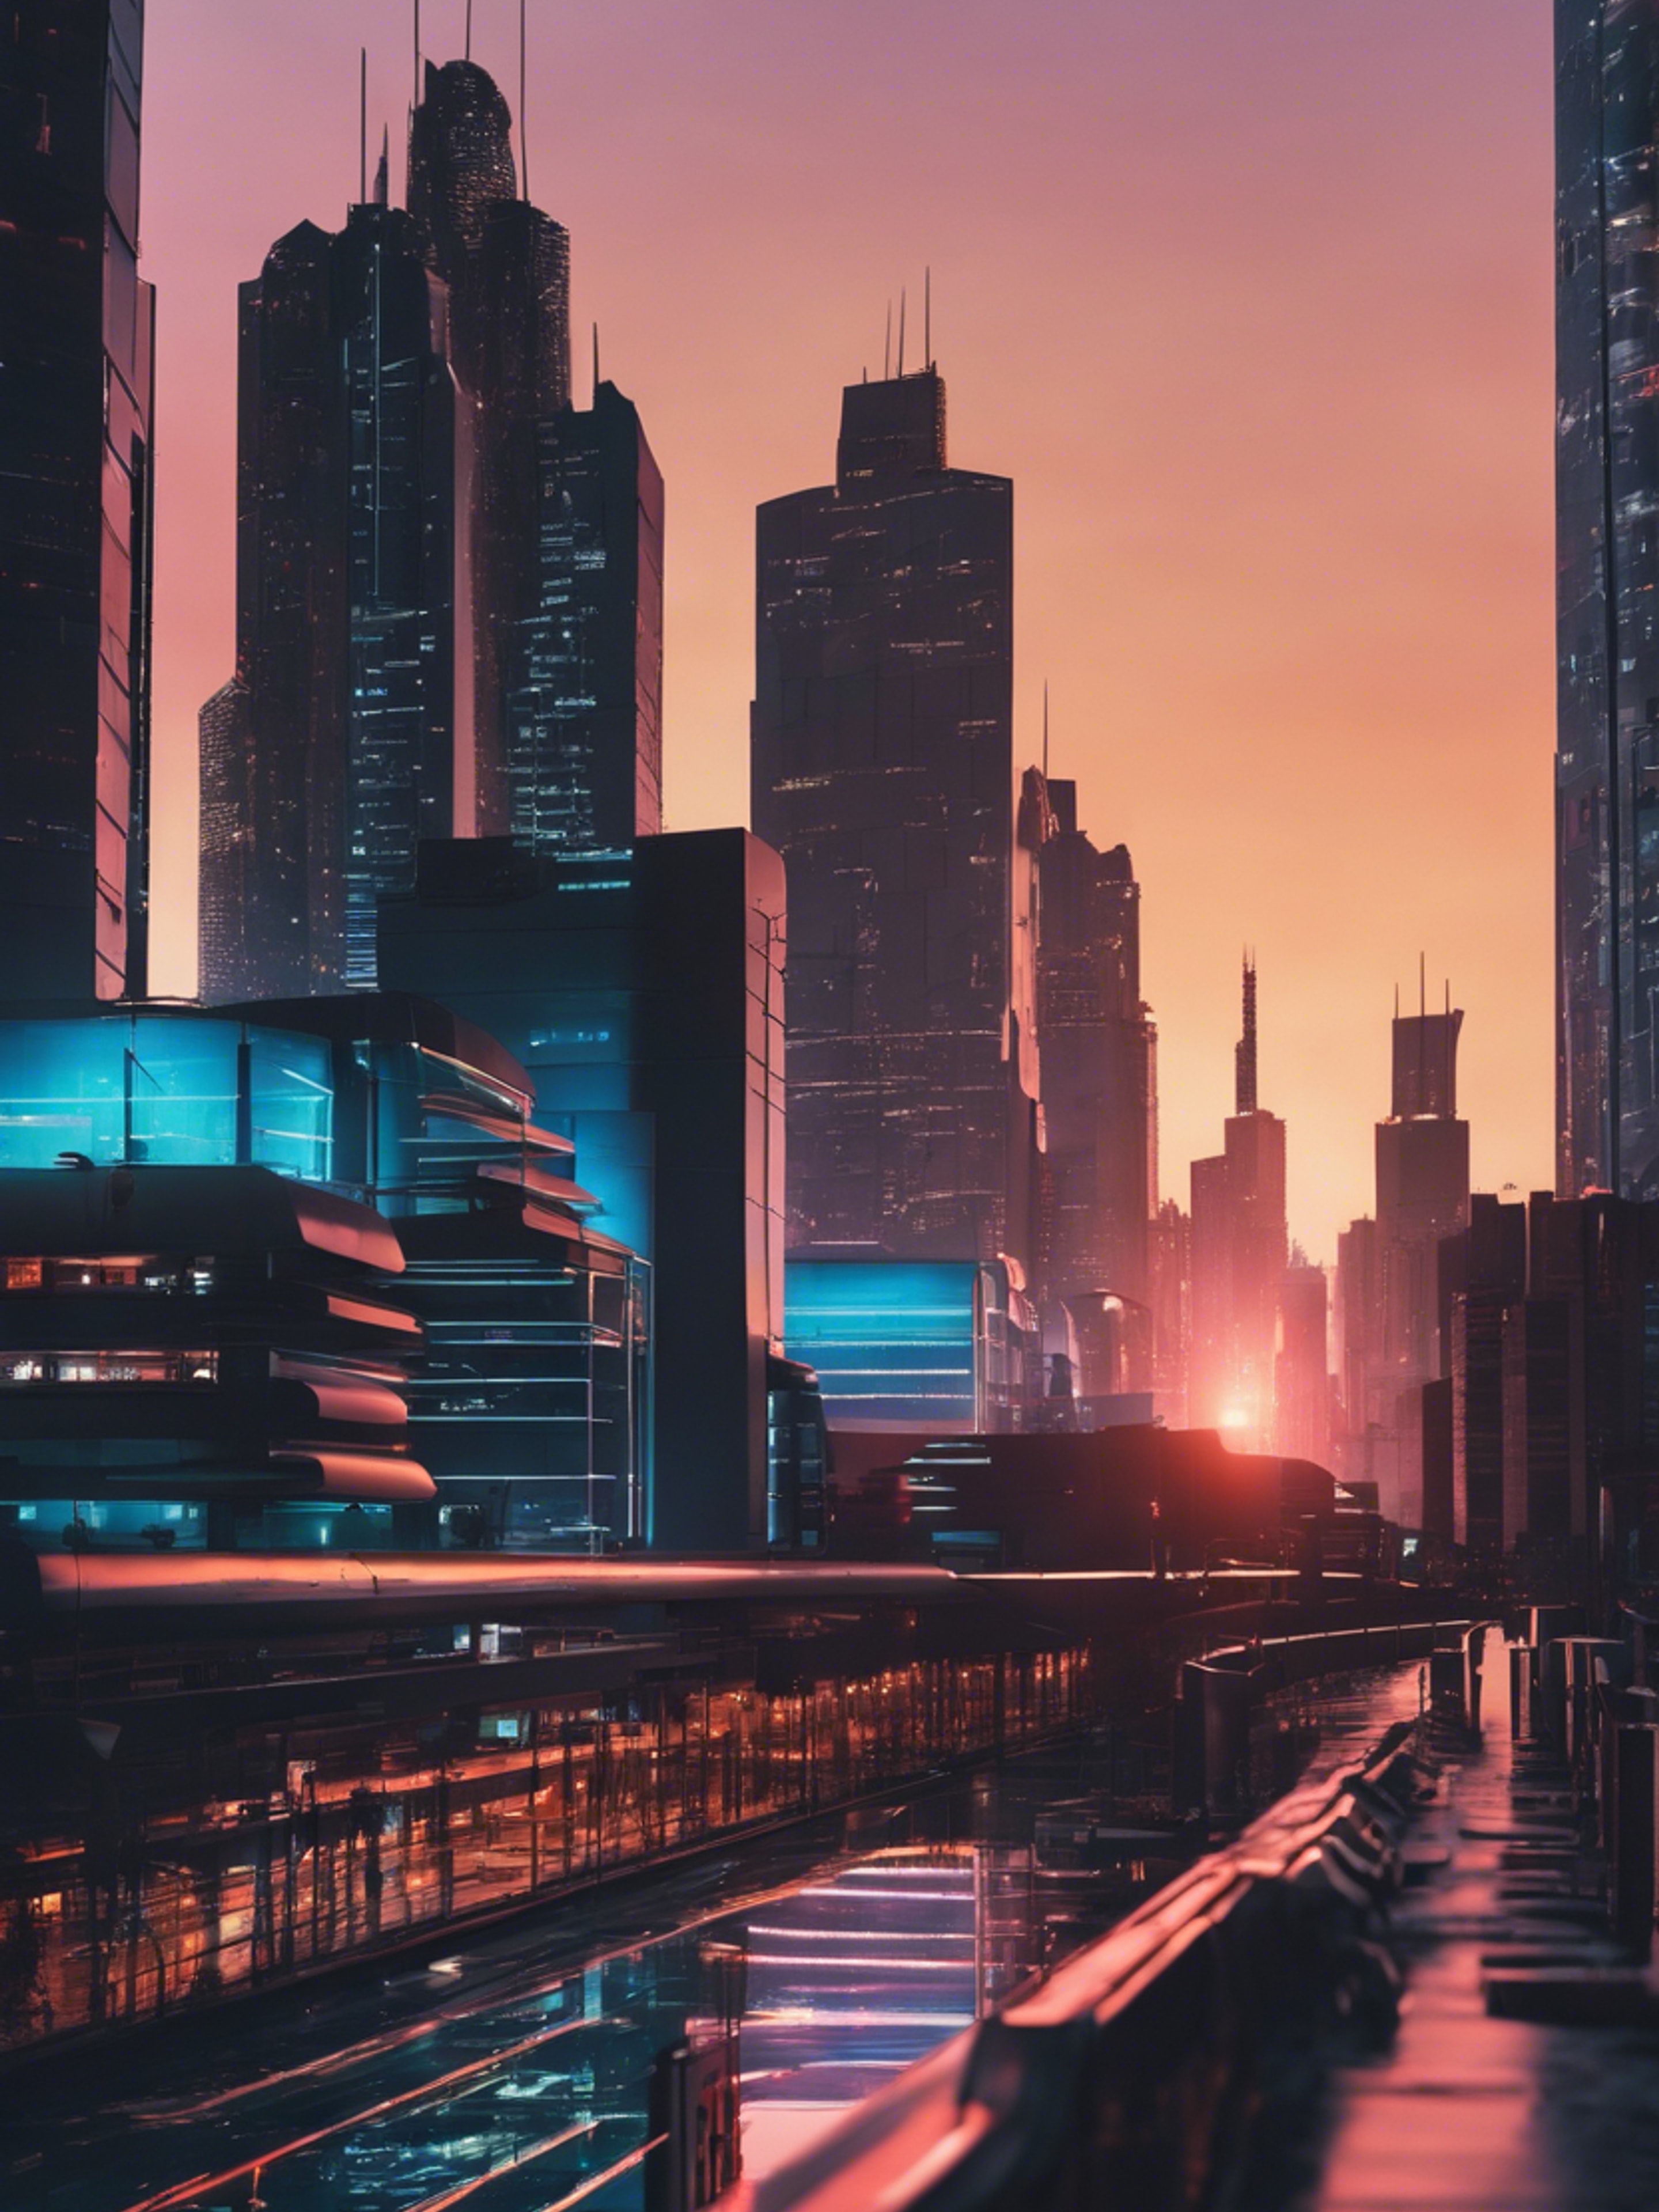 A sleek, futuristic cityscape at sunset, with buildings made of reflective black glass, sparking with cool neon lights. Обои[602b1b36f4744978842c]